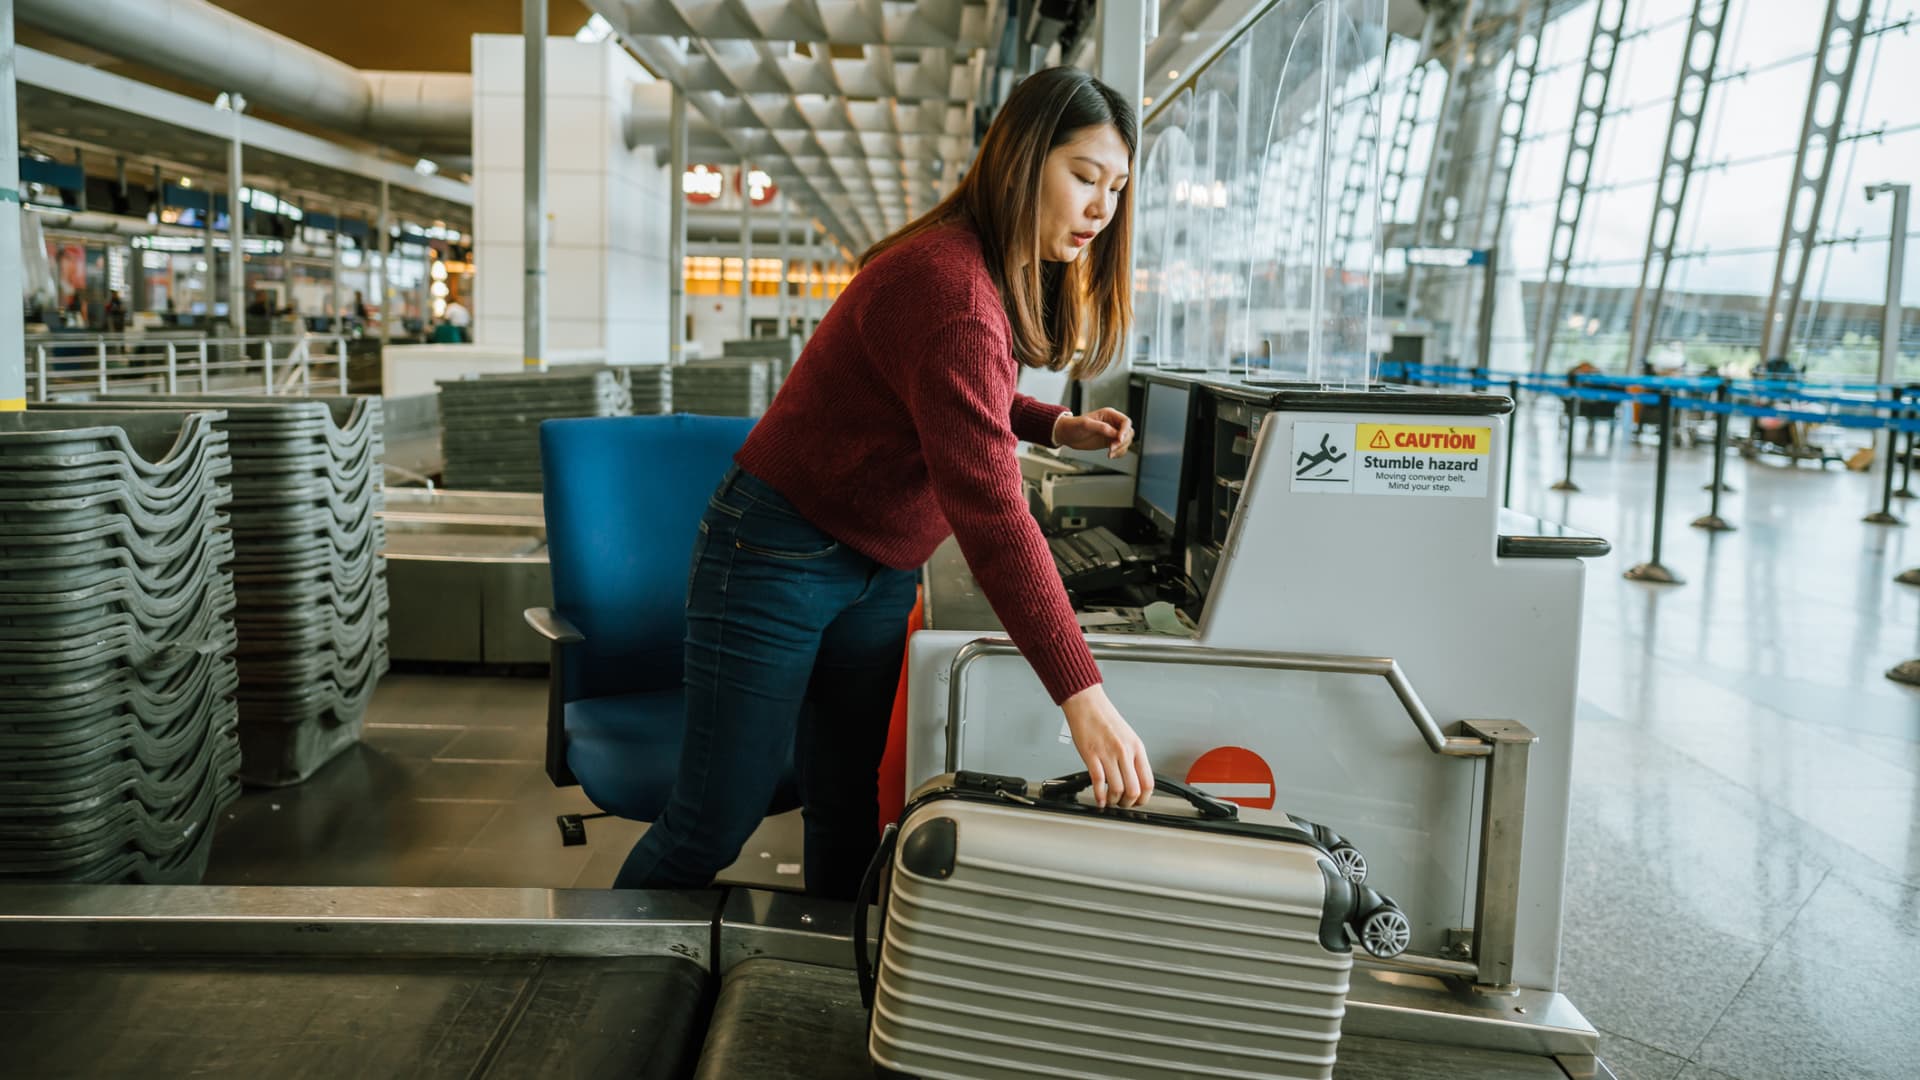 American airlines follow regulations set forth by the International Civil Aviation Organization, which does not require that passengers be weighed, said Hilderman.